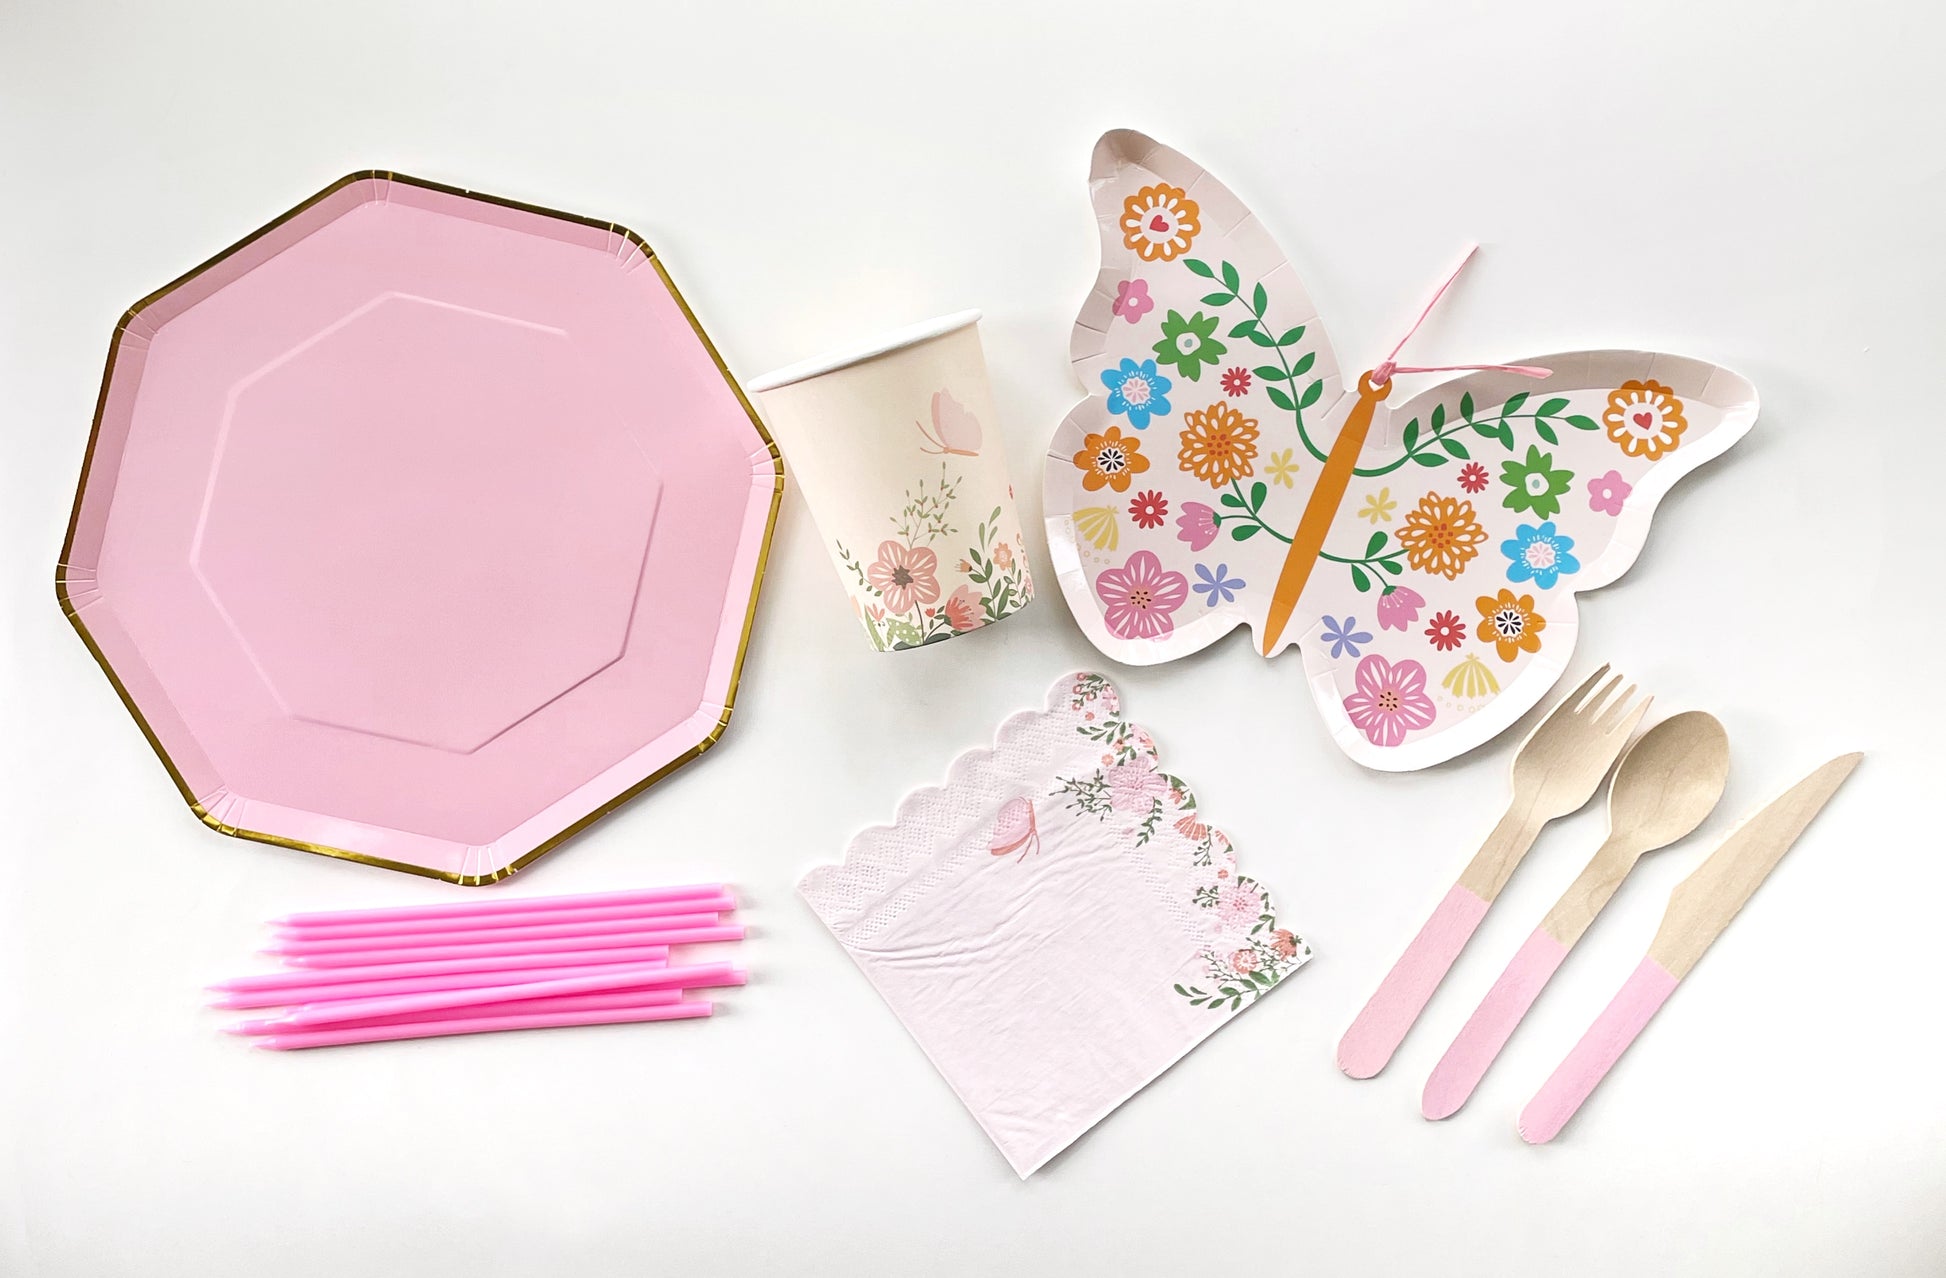 The complete Butterfly Party Kit including large pink and gold paper party plates, small butterfly shaped paper party plates, paper cups, pink paper napkins, pink dipped wooden utensils and tall pink birthday candles. The Butterfly pattern includes pink, gold, blue, green and orange colours. The large party plates are in the shape of an octagon.